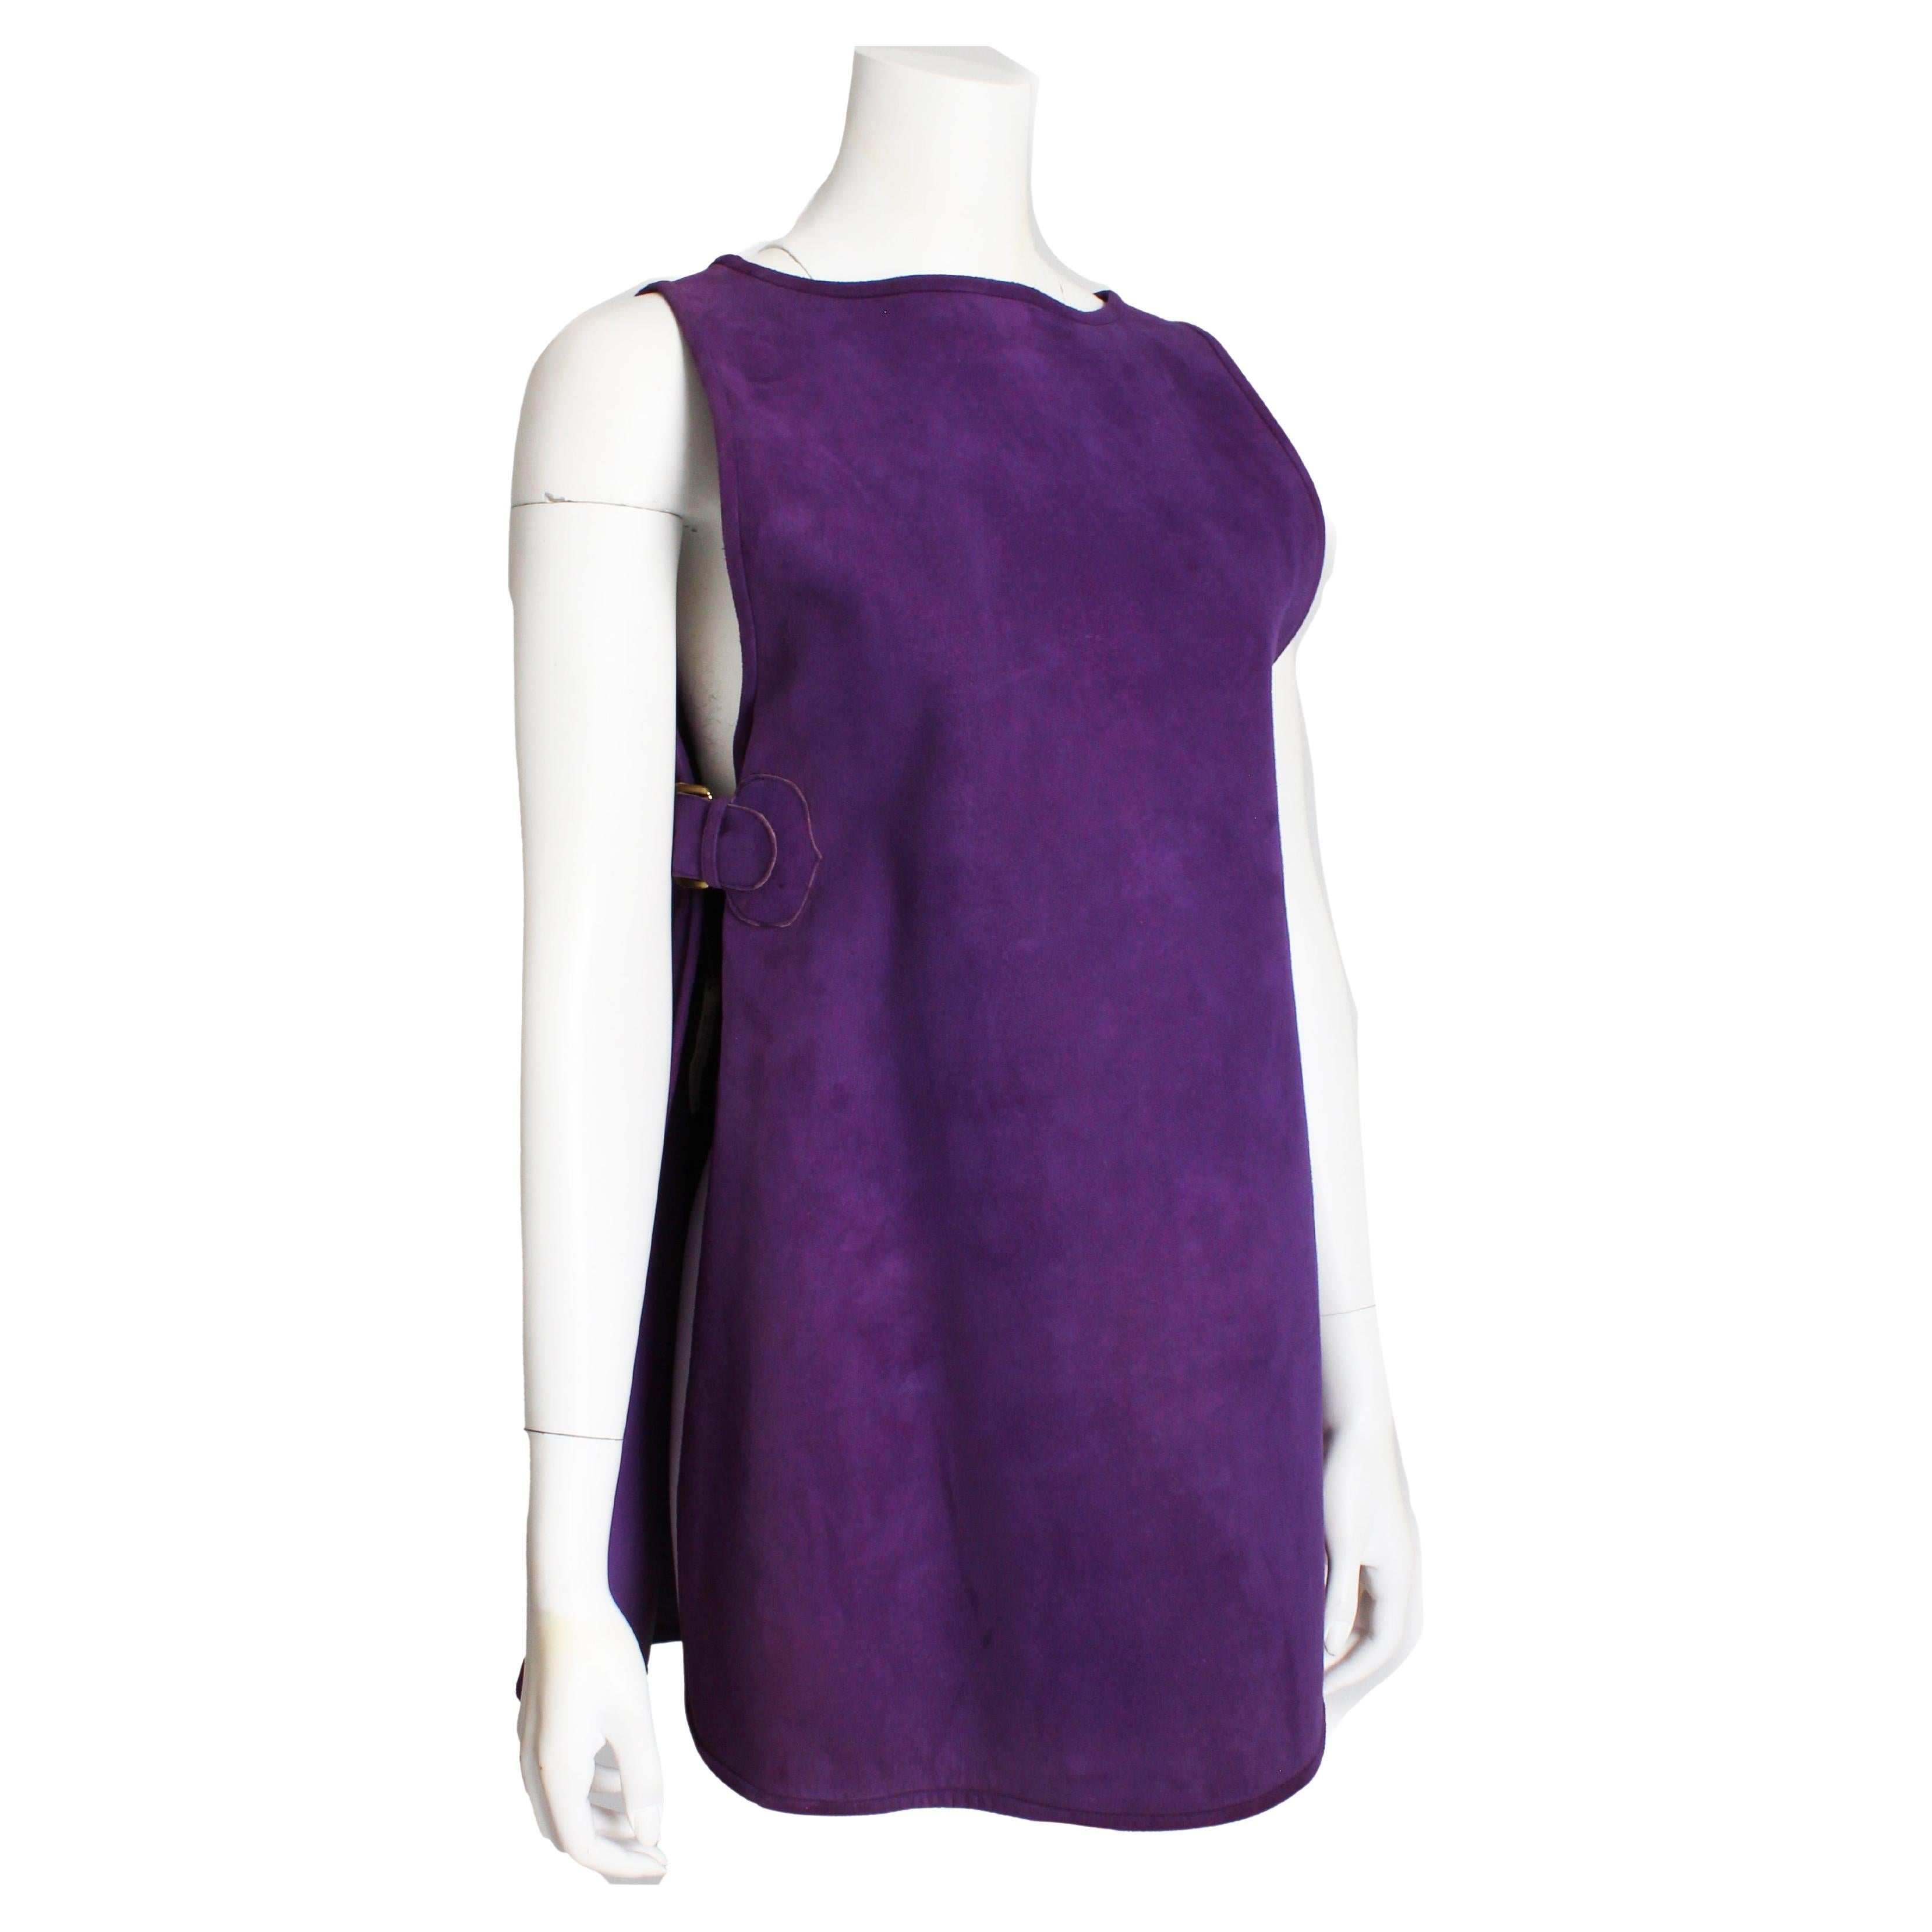 Bonnie Cashin for Sills Tunic Dress Lilac Suede Saks 5th Ave Vintage 60s NOS NWT For Sale